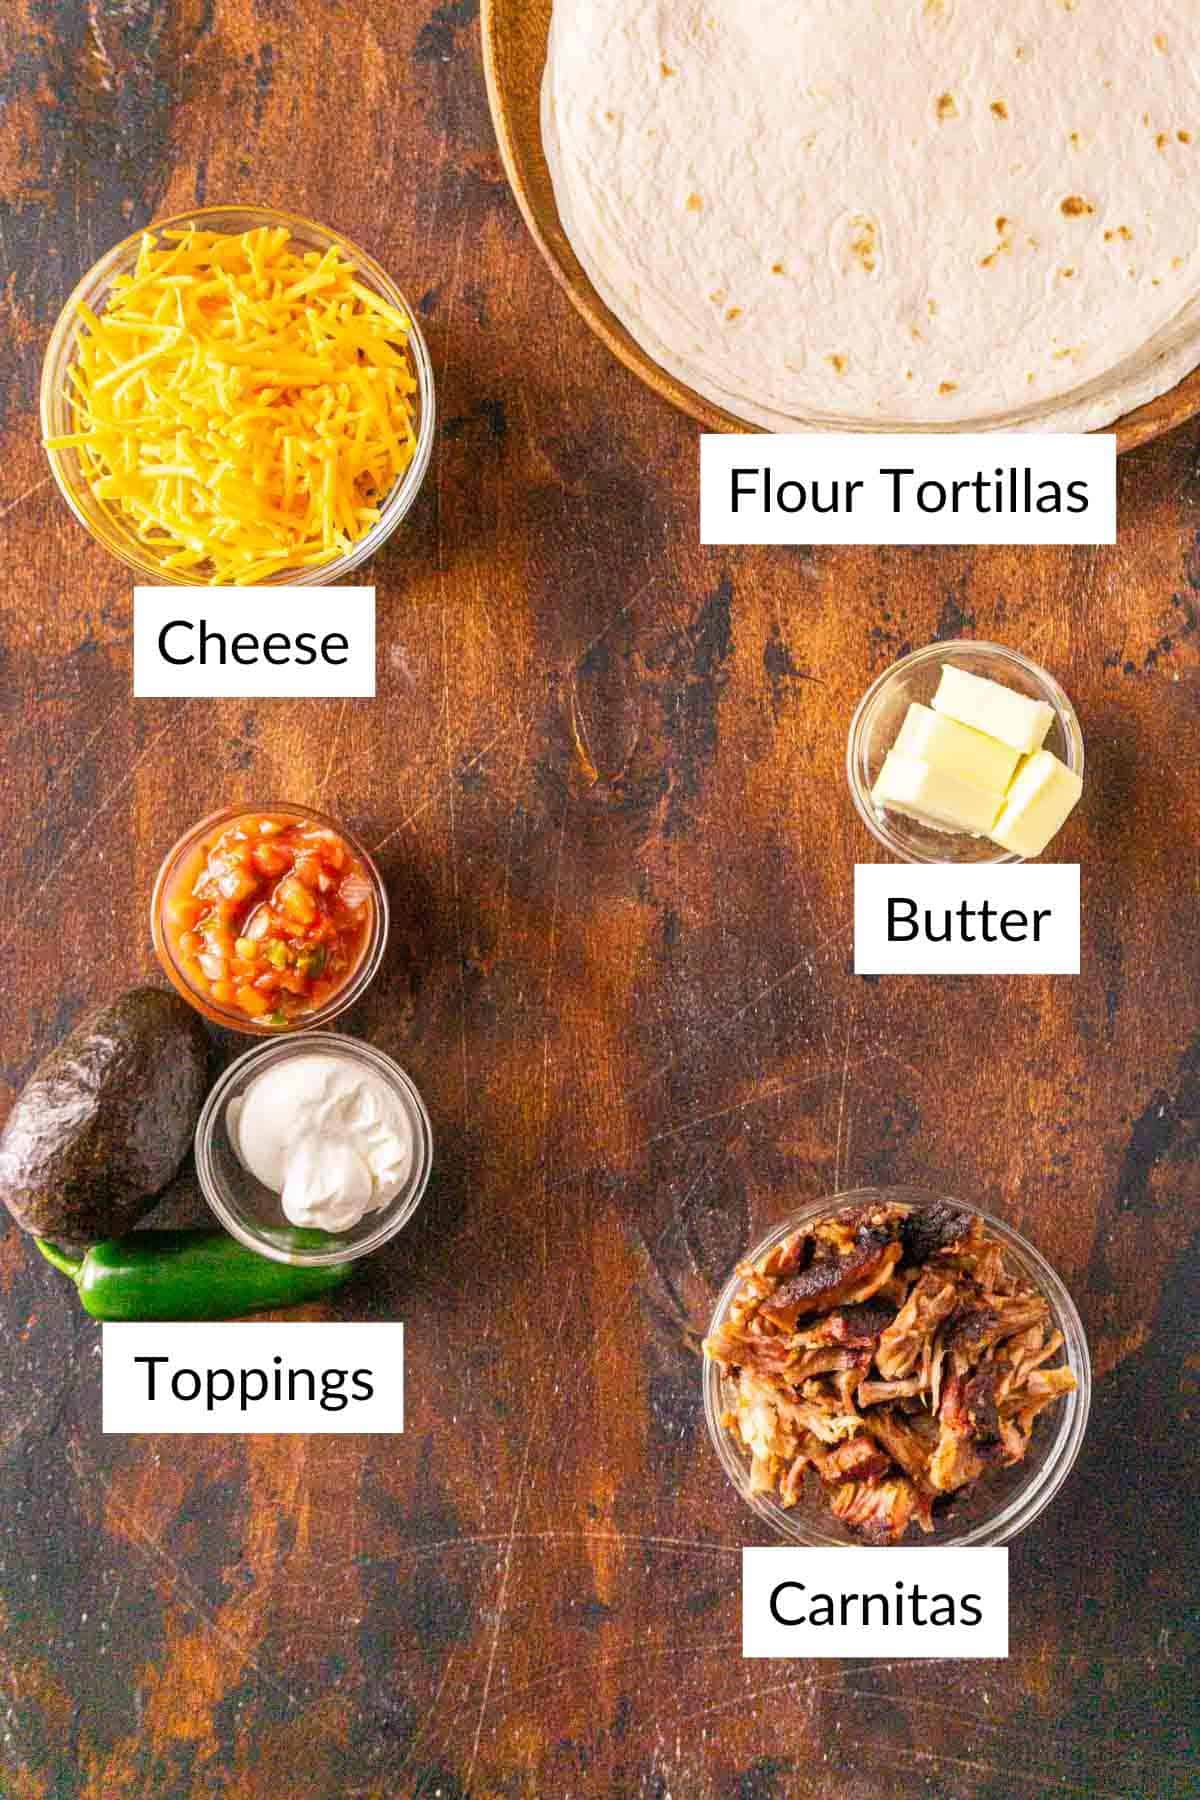 The ingredients for the quesadillas on a brown and black wooden surface with white labels by the items.